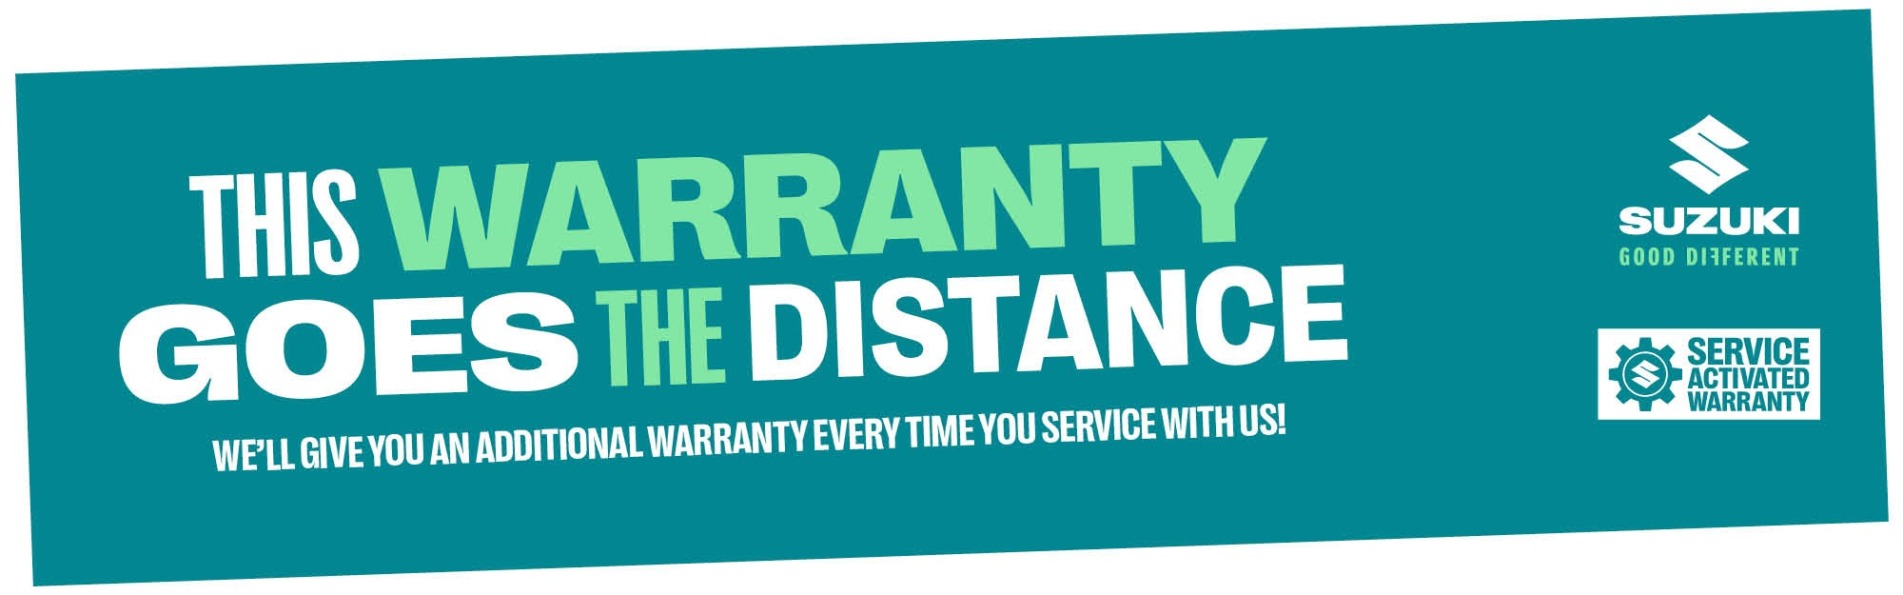 Service activated warranty